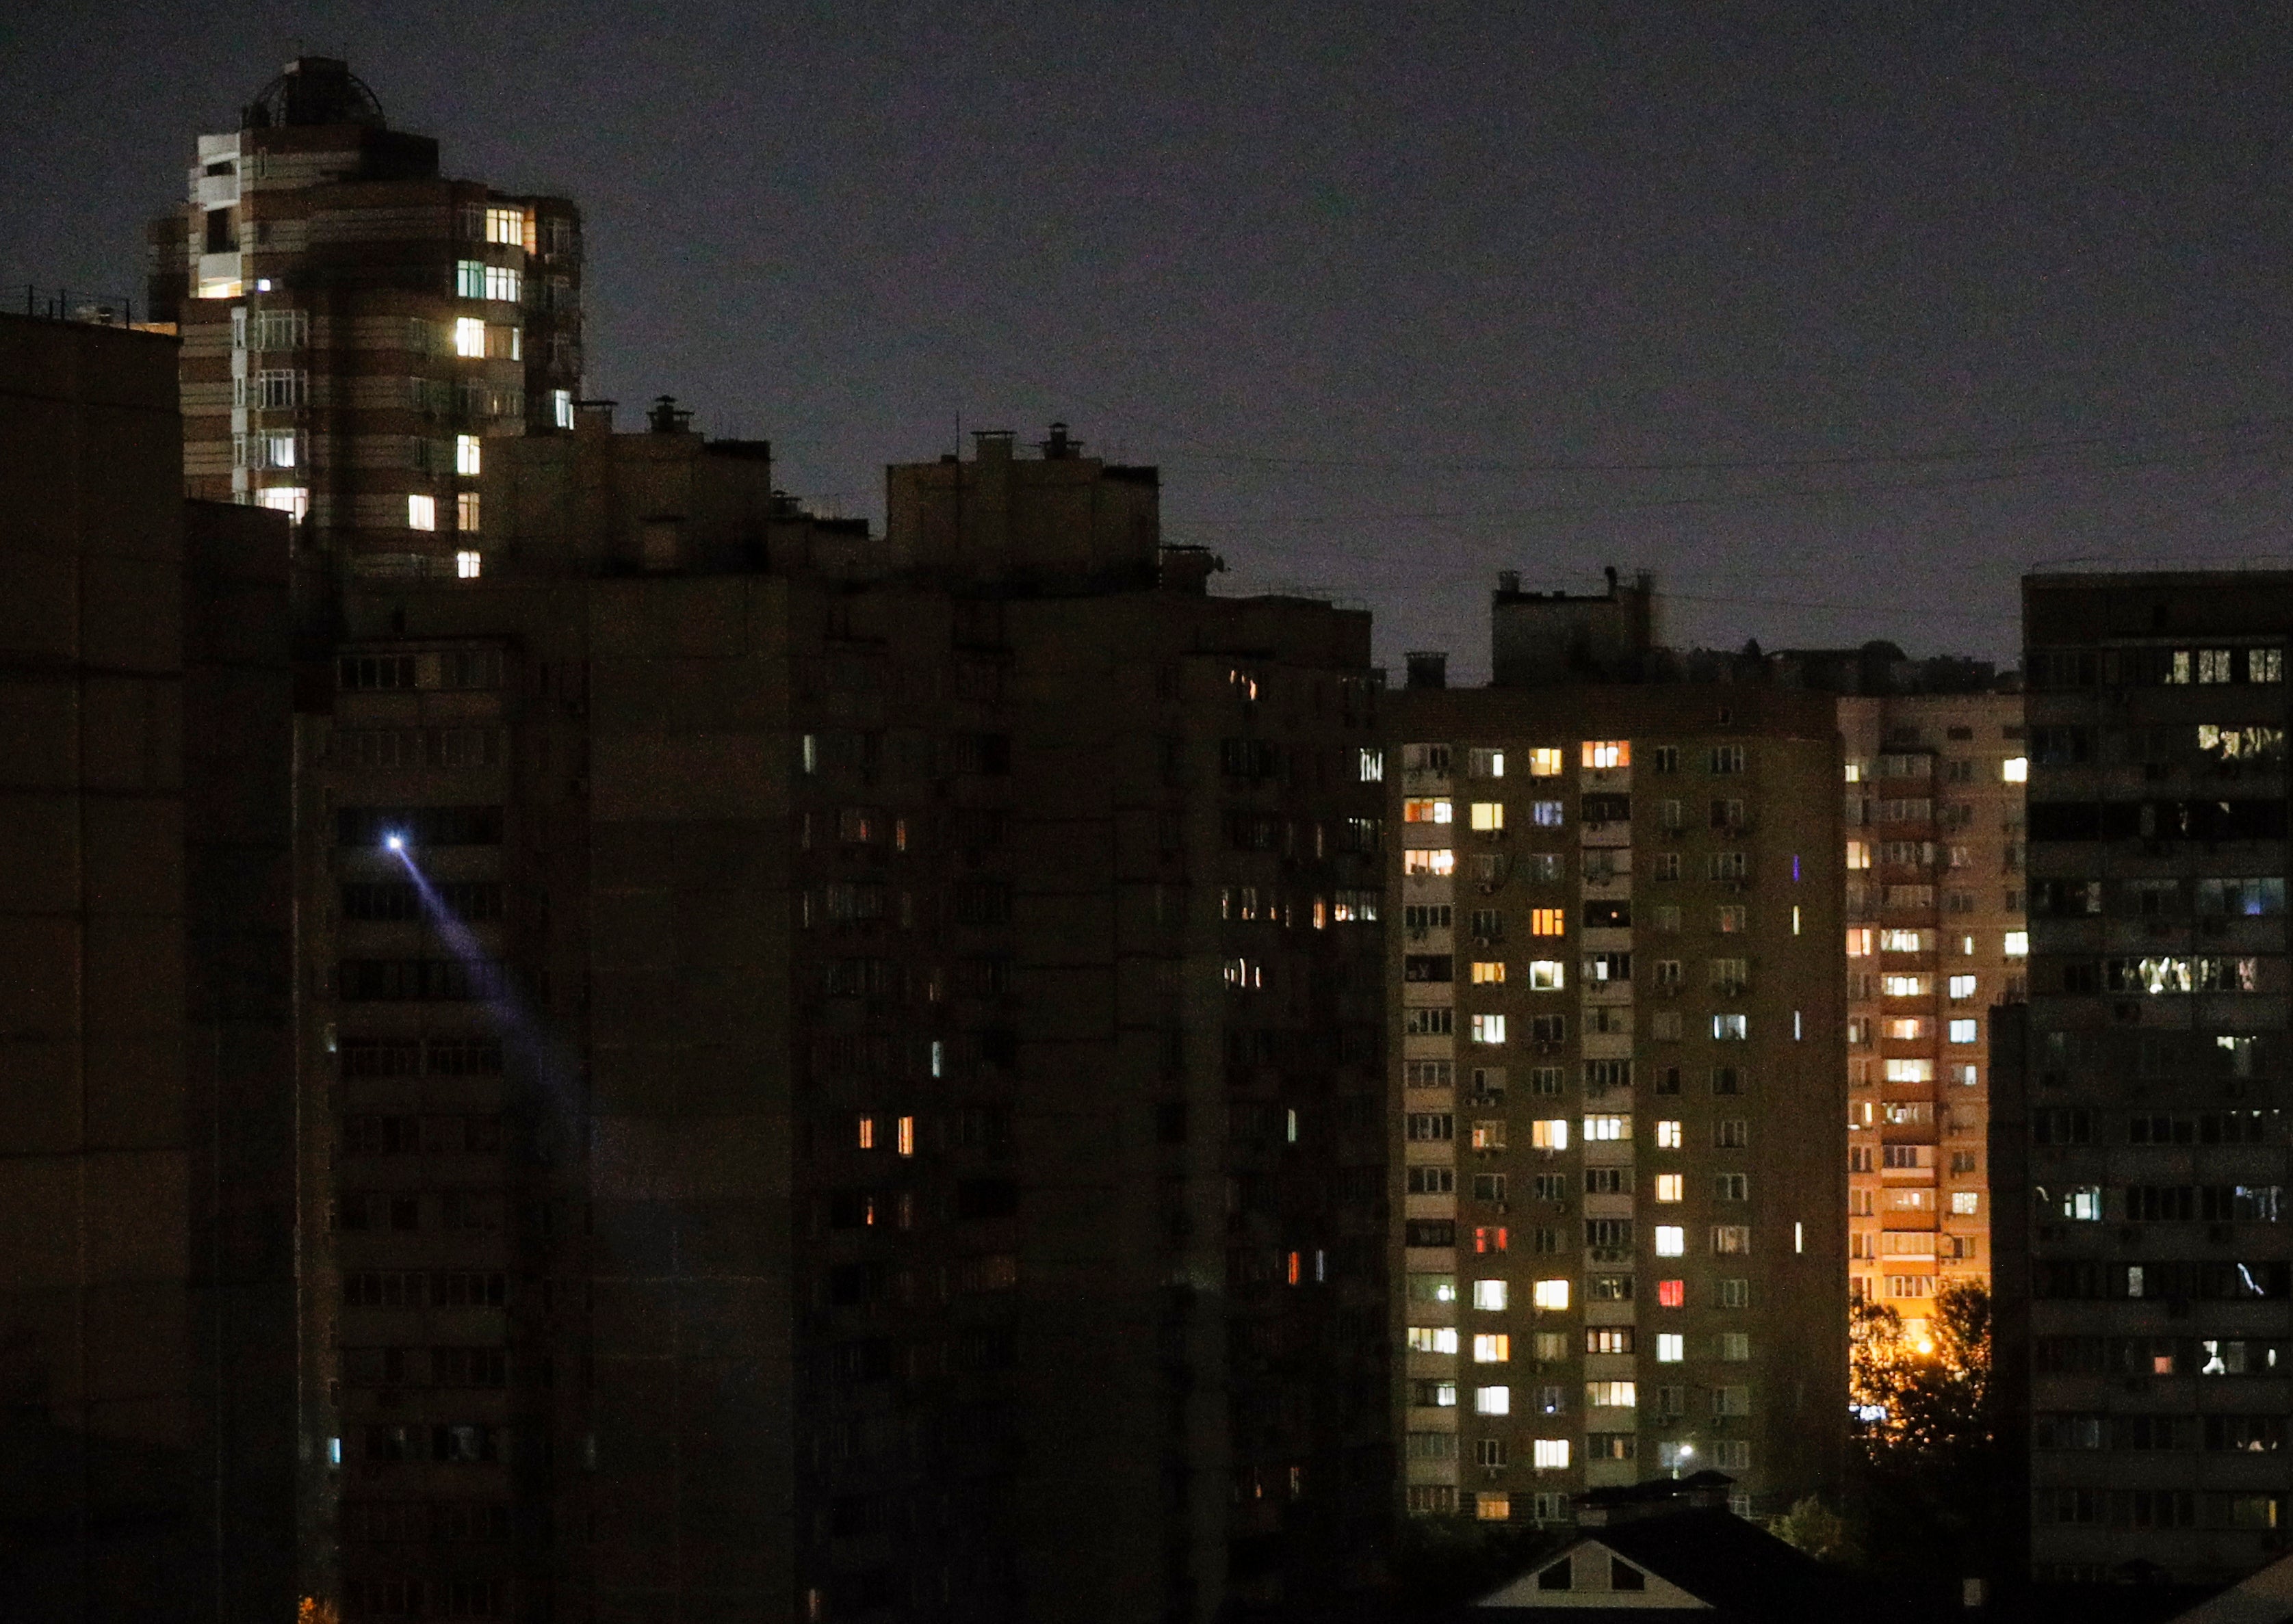 A part of Kyiv in darkness during cyclical power cutoffs